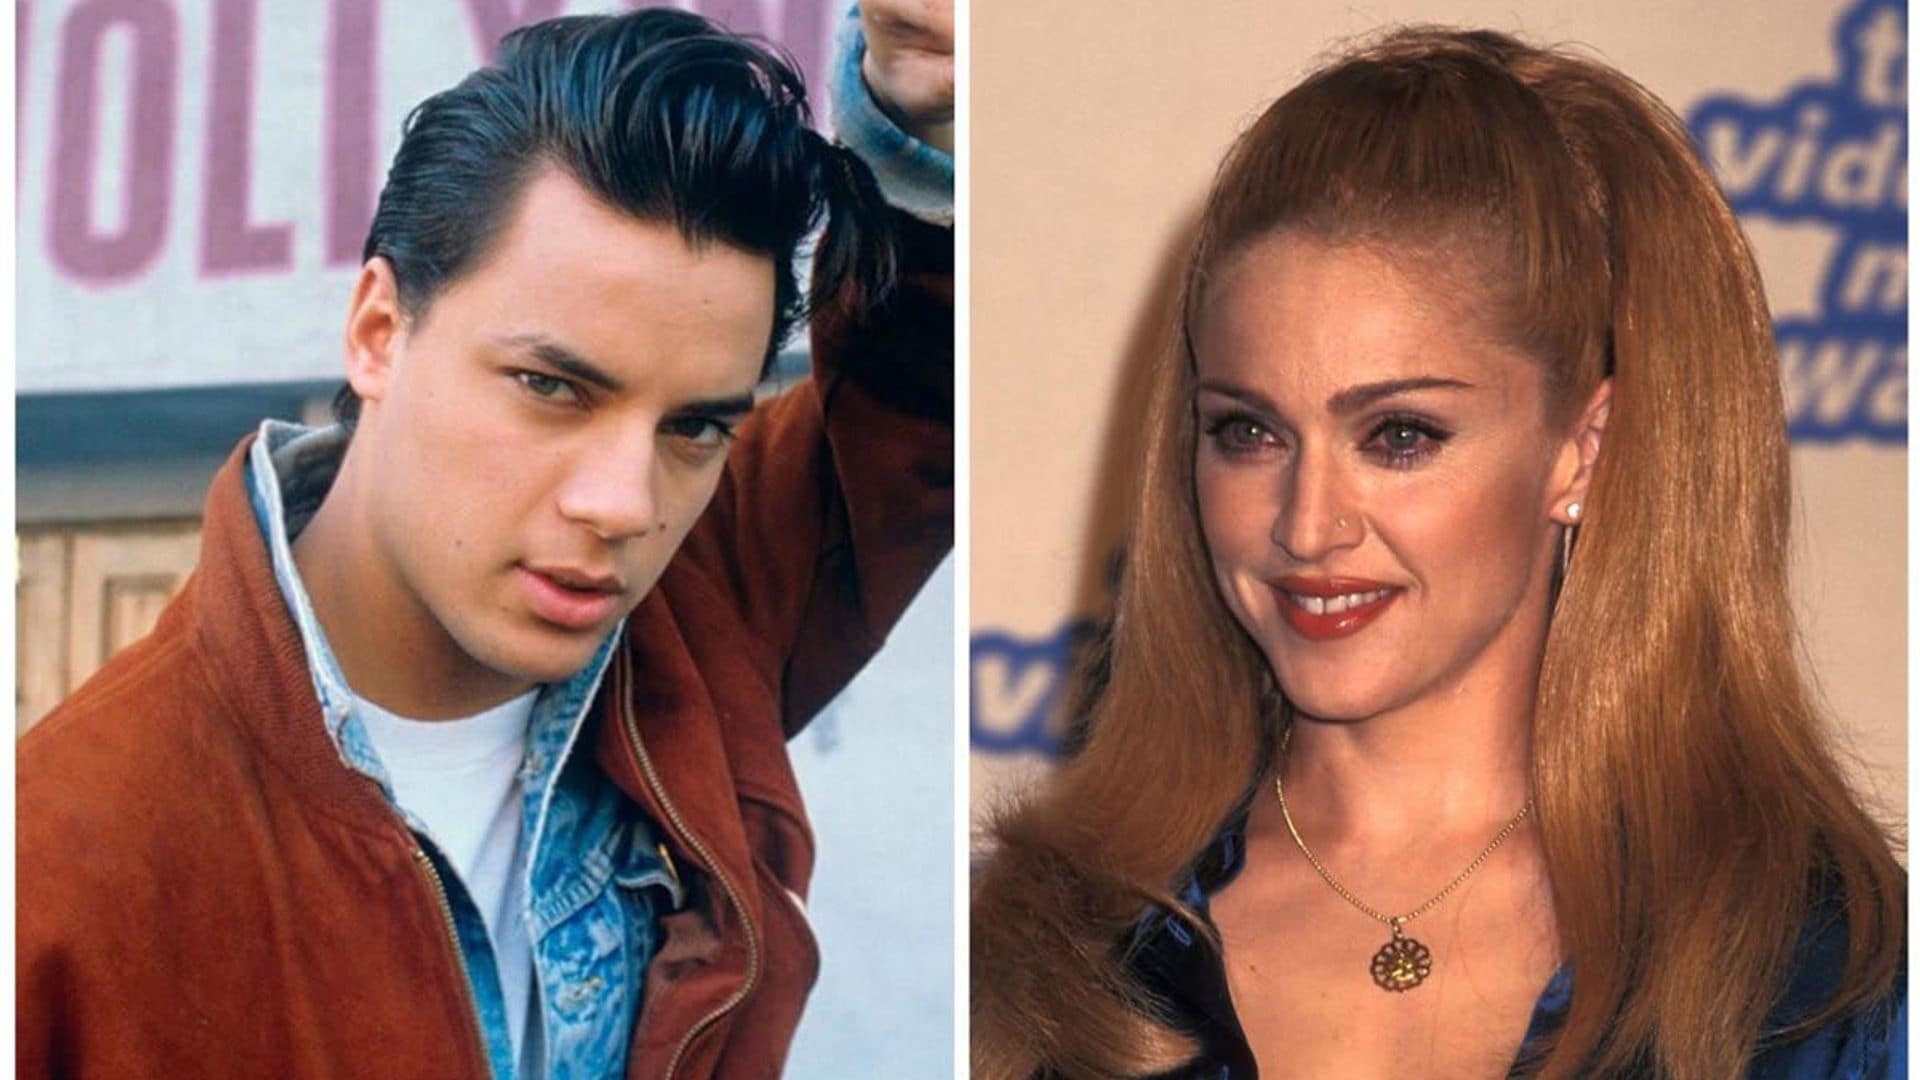 Madonna pays emotional tribute to her long-time friend Nick Kamen